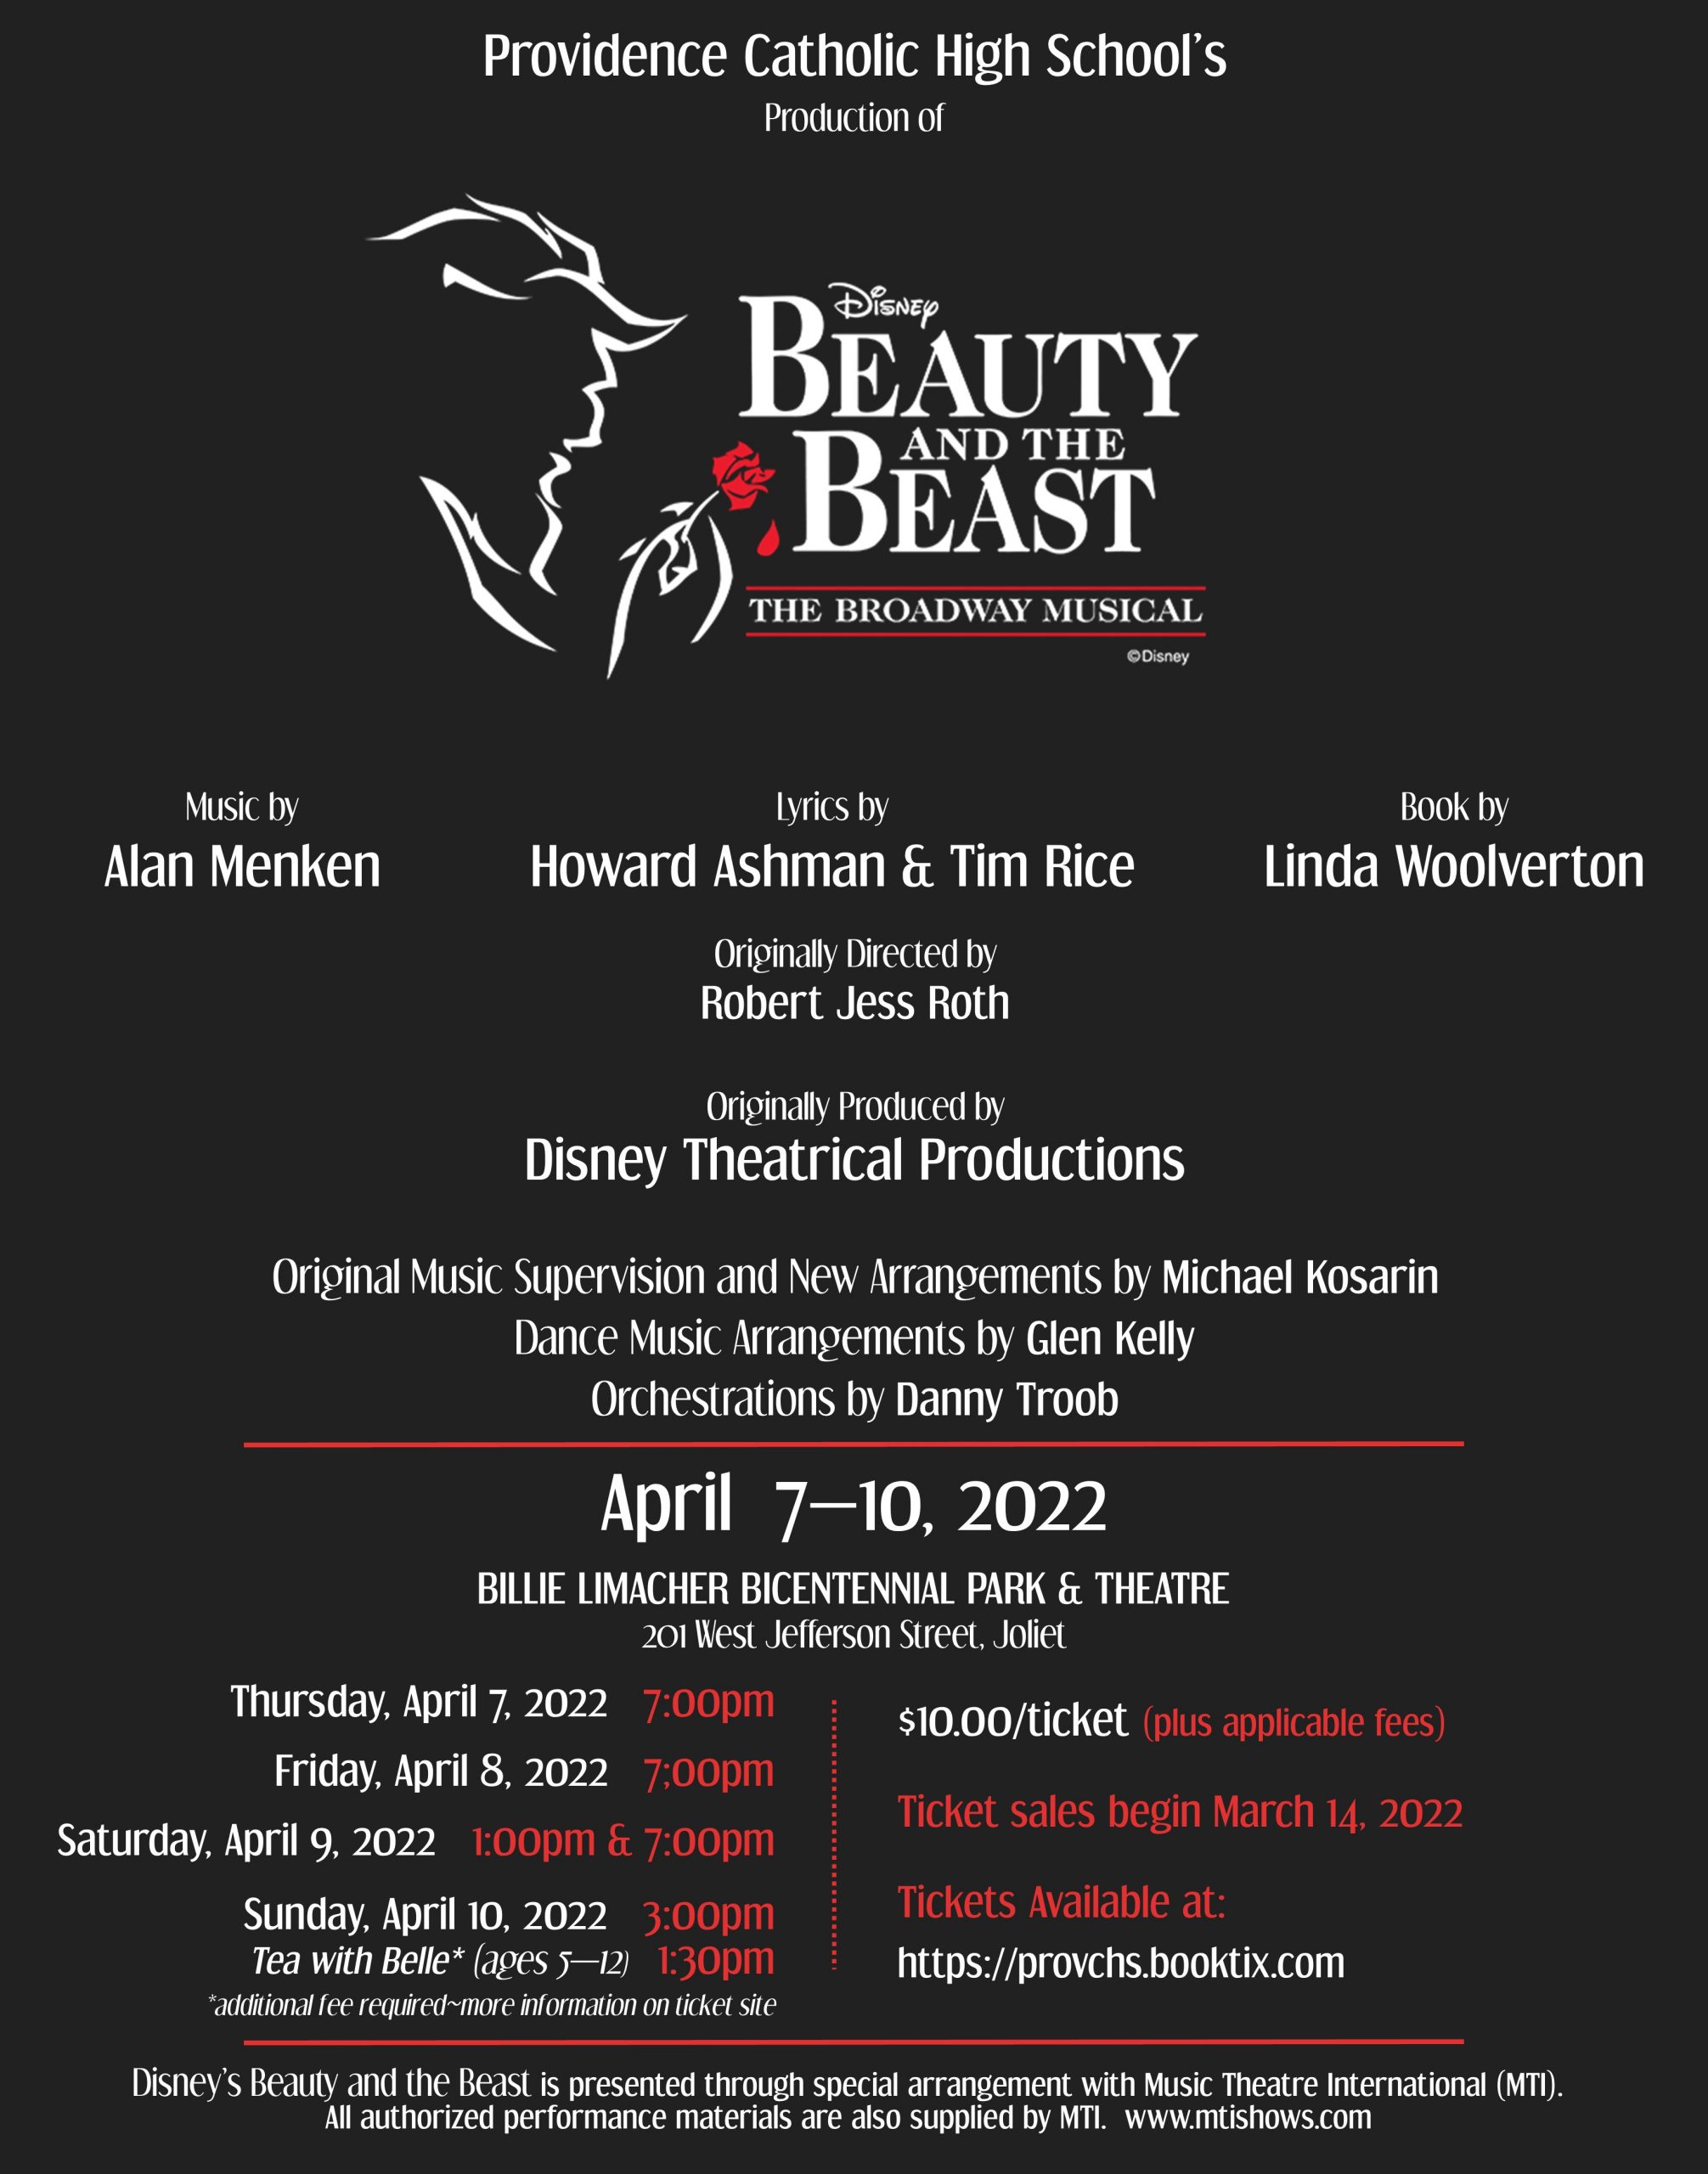 Beauty and the Beast Musical Tickets on Sale Now! | Providence Catholic ...